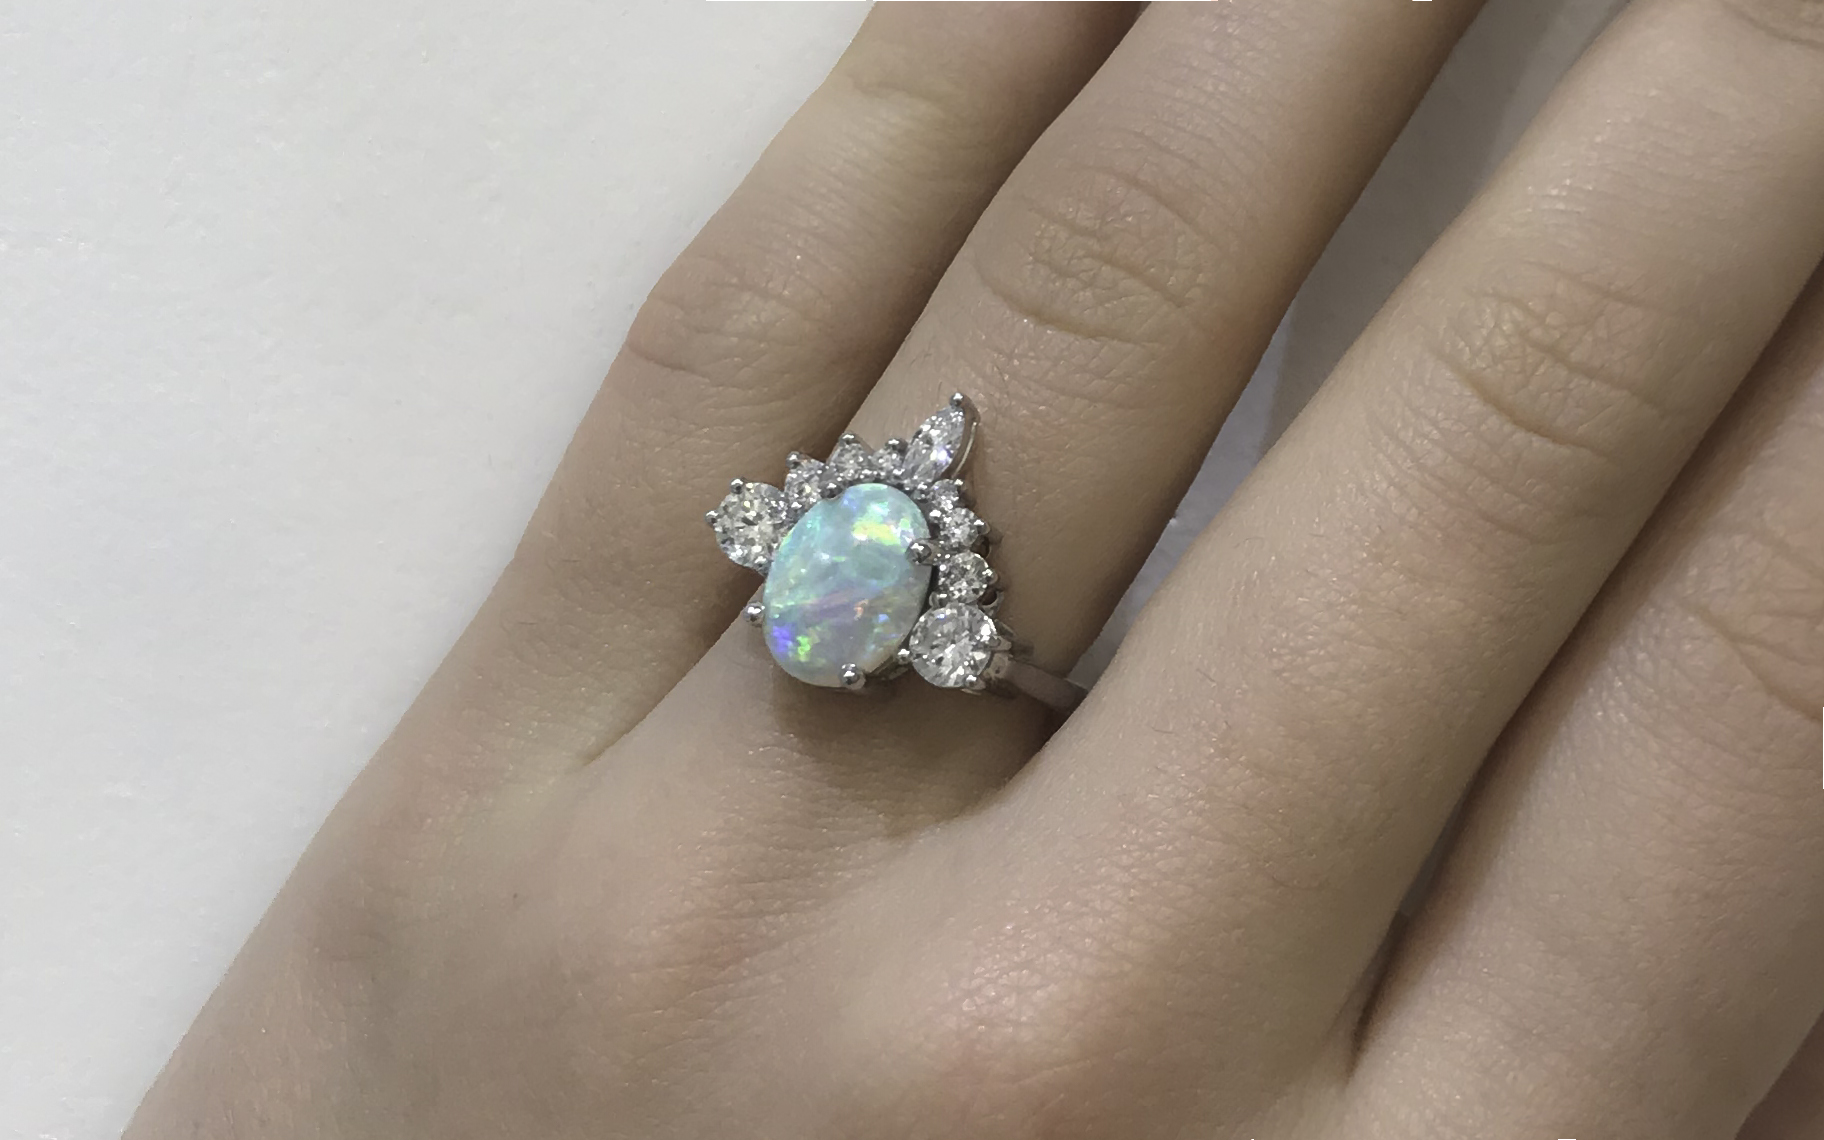 White opal and diamond engagement ring